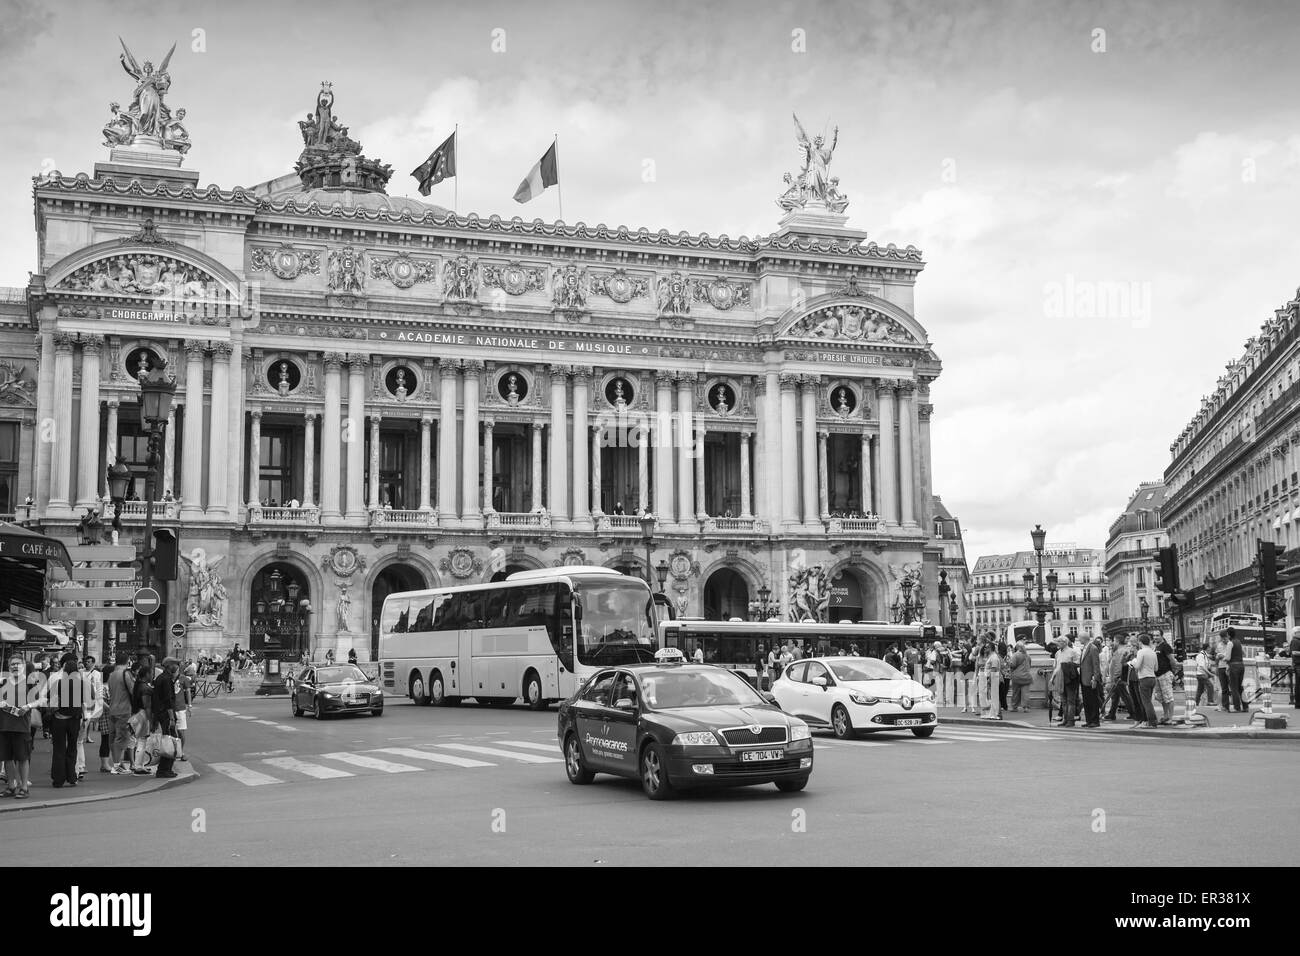 Paris, France - August 09, 2014: Palais Garnier, old Opera house in Paris with walkink people and cars on the street, monochrome Stock Photo